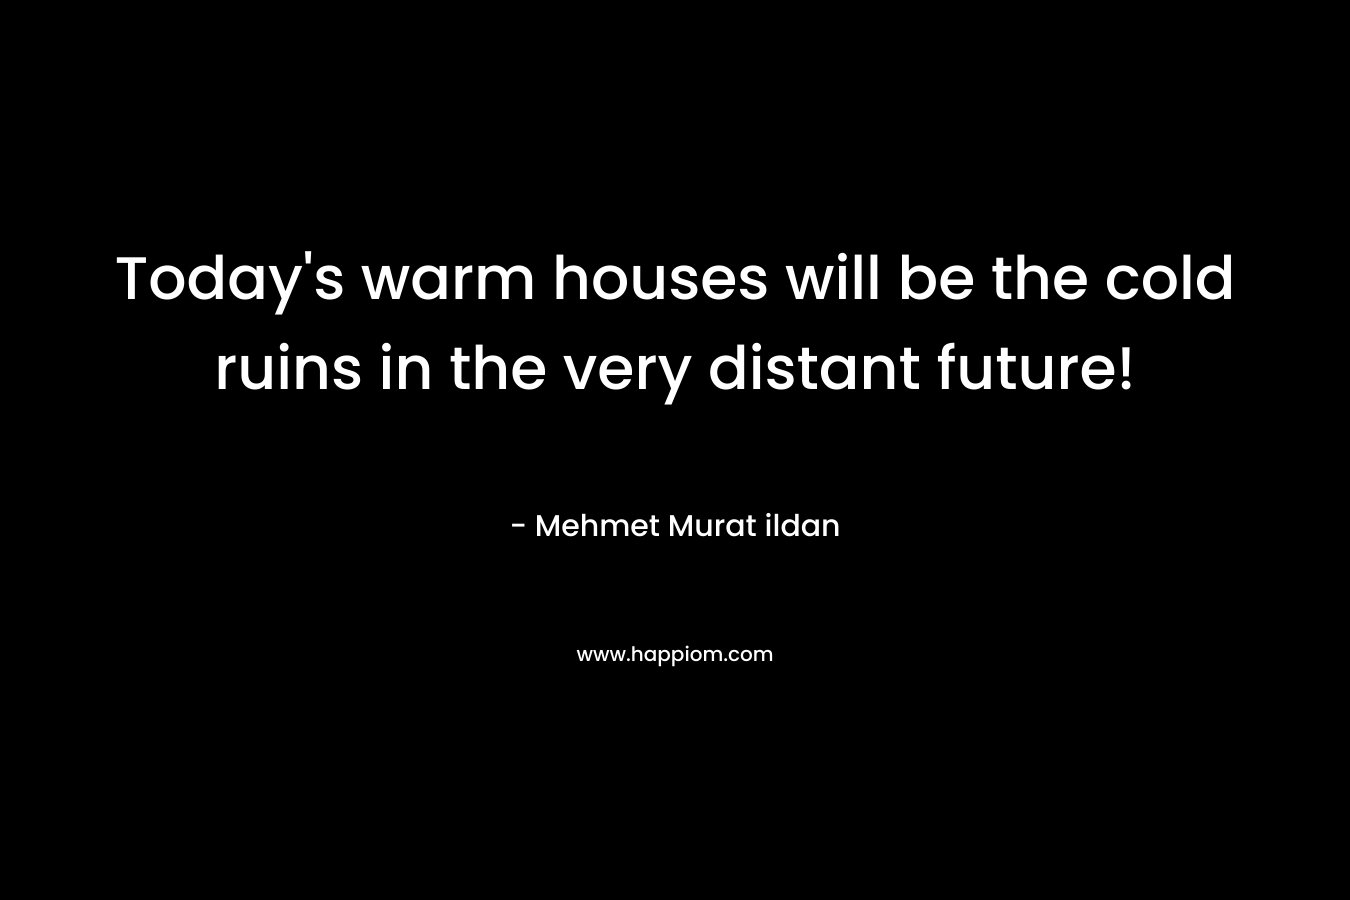 Today’s warm houses will be the cold ruins in the very distant future! – Mehmet Murat ildan